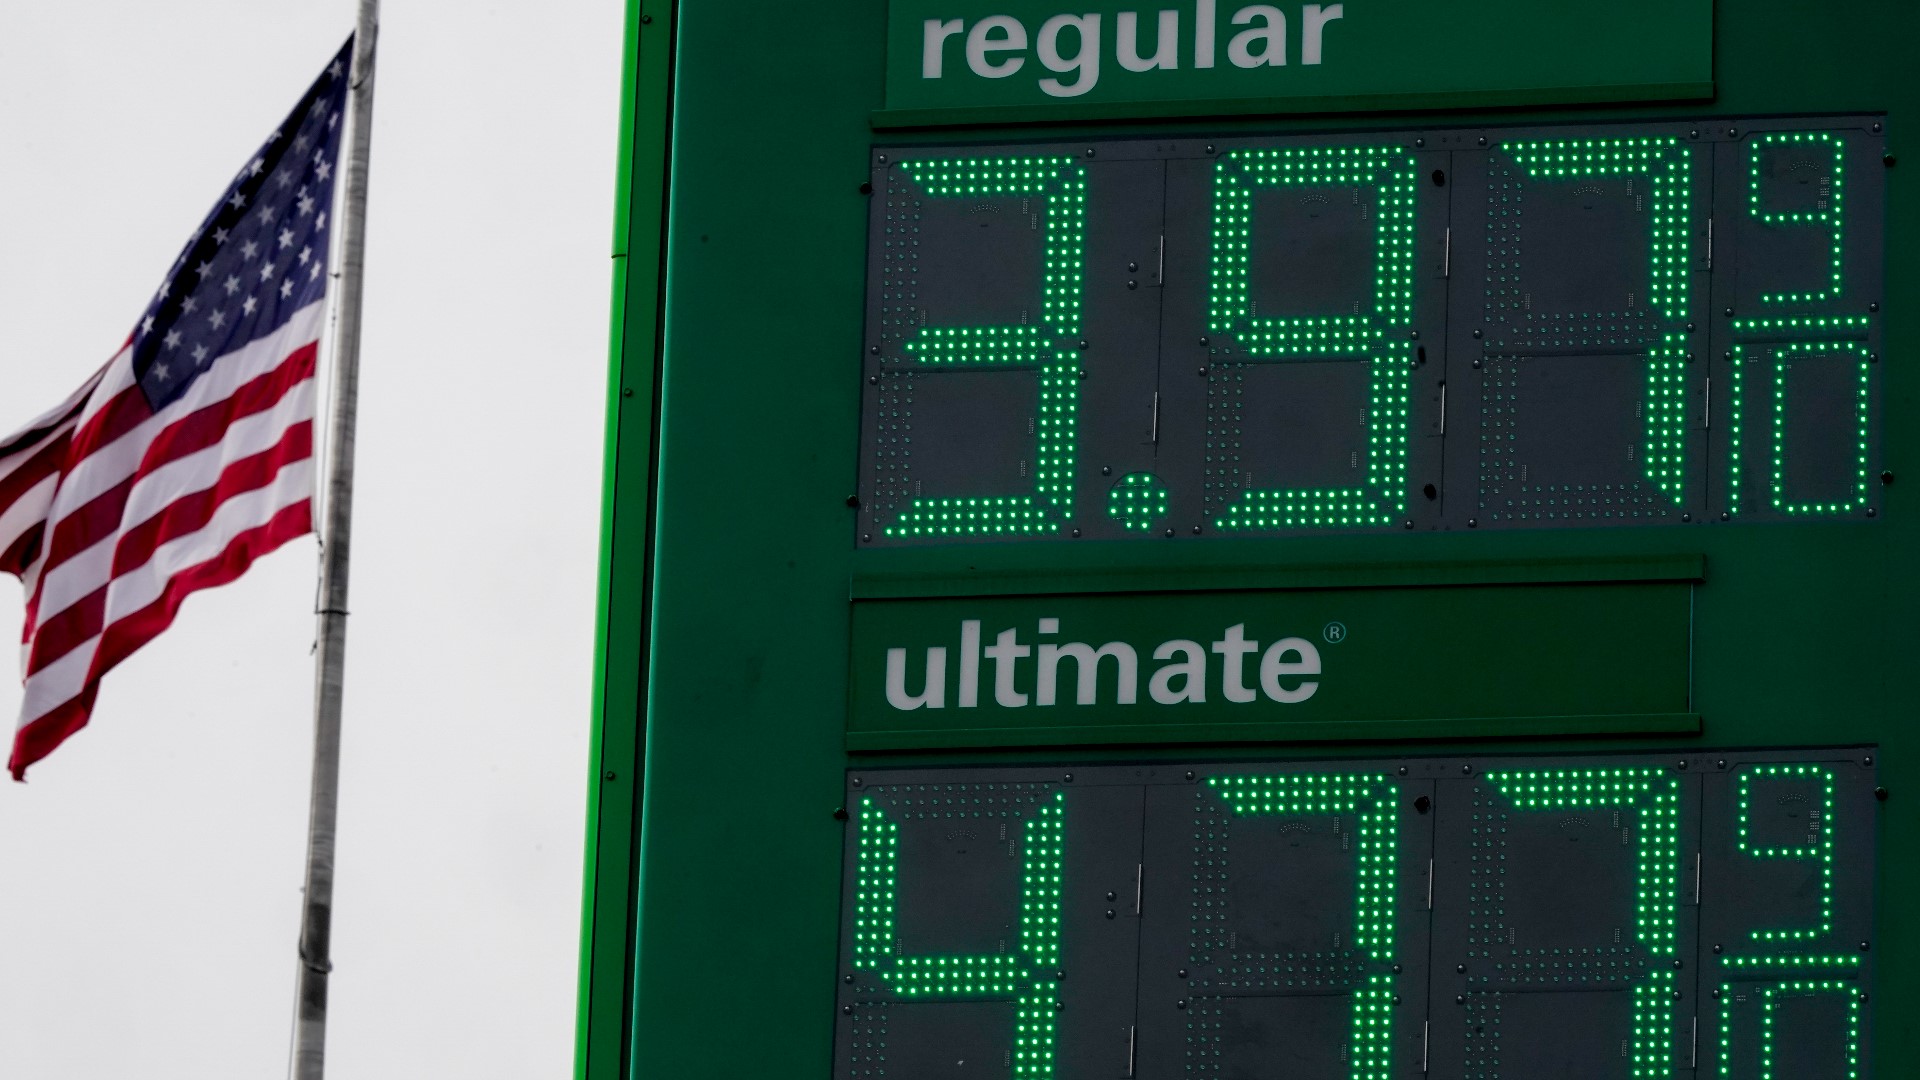 The average price of gas in North Carolina and South Carolina is now over $4, while diesel has hit a record well above $5 per gallon.